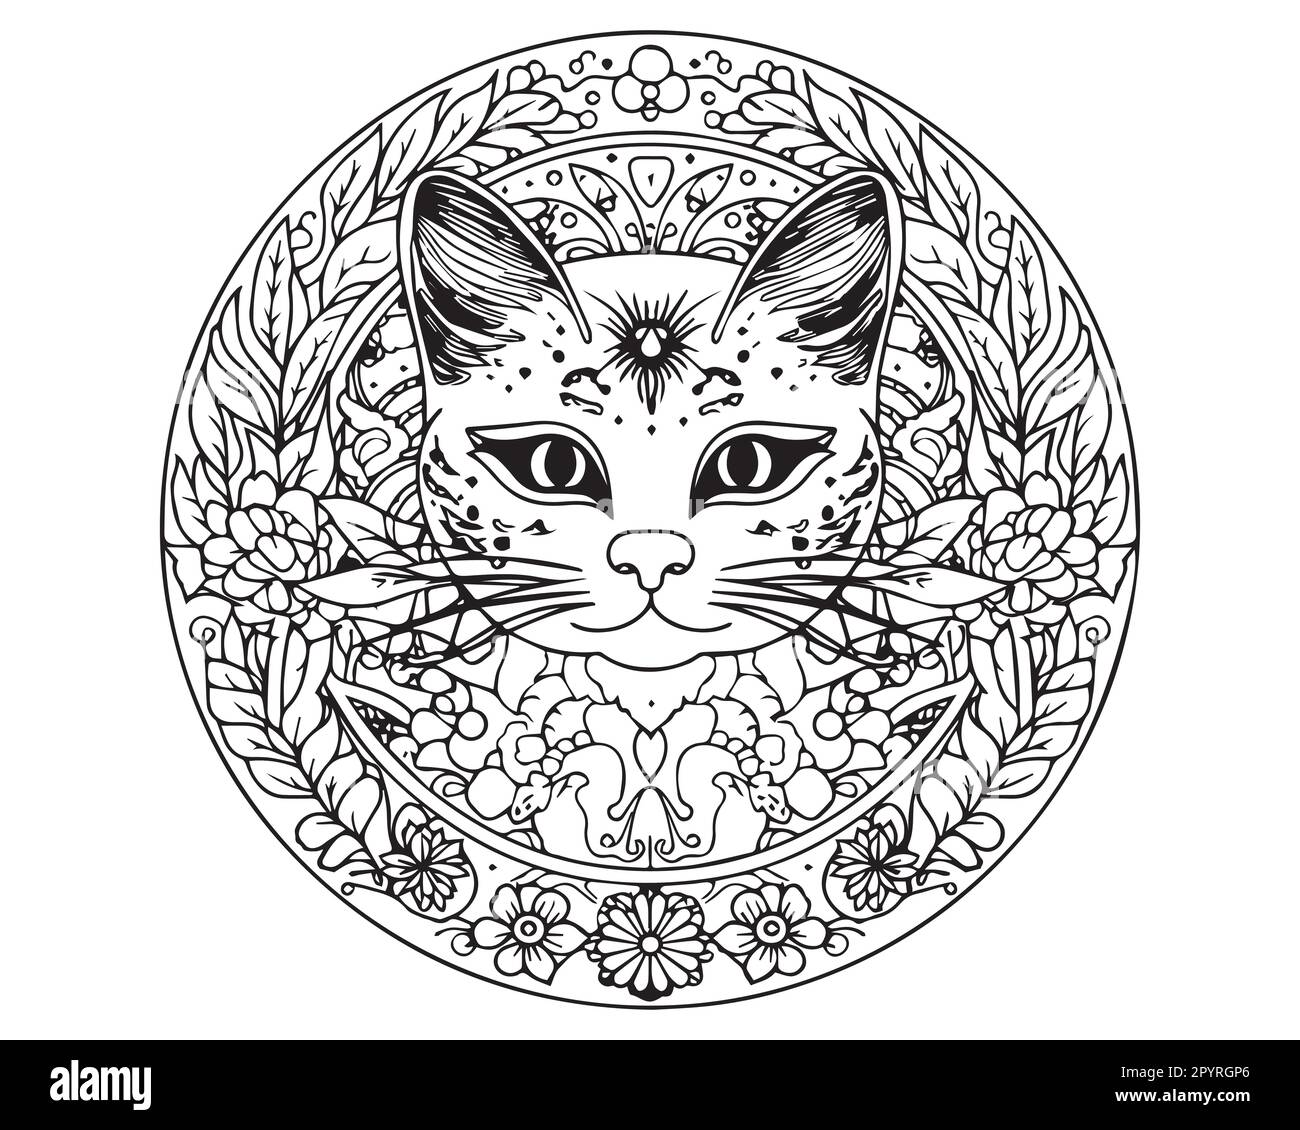 An animal coloring page. Silhouette cat head coloring sheets. Line art vector illustration. Stock Vector